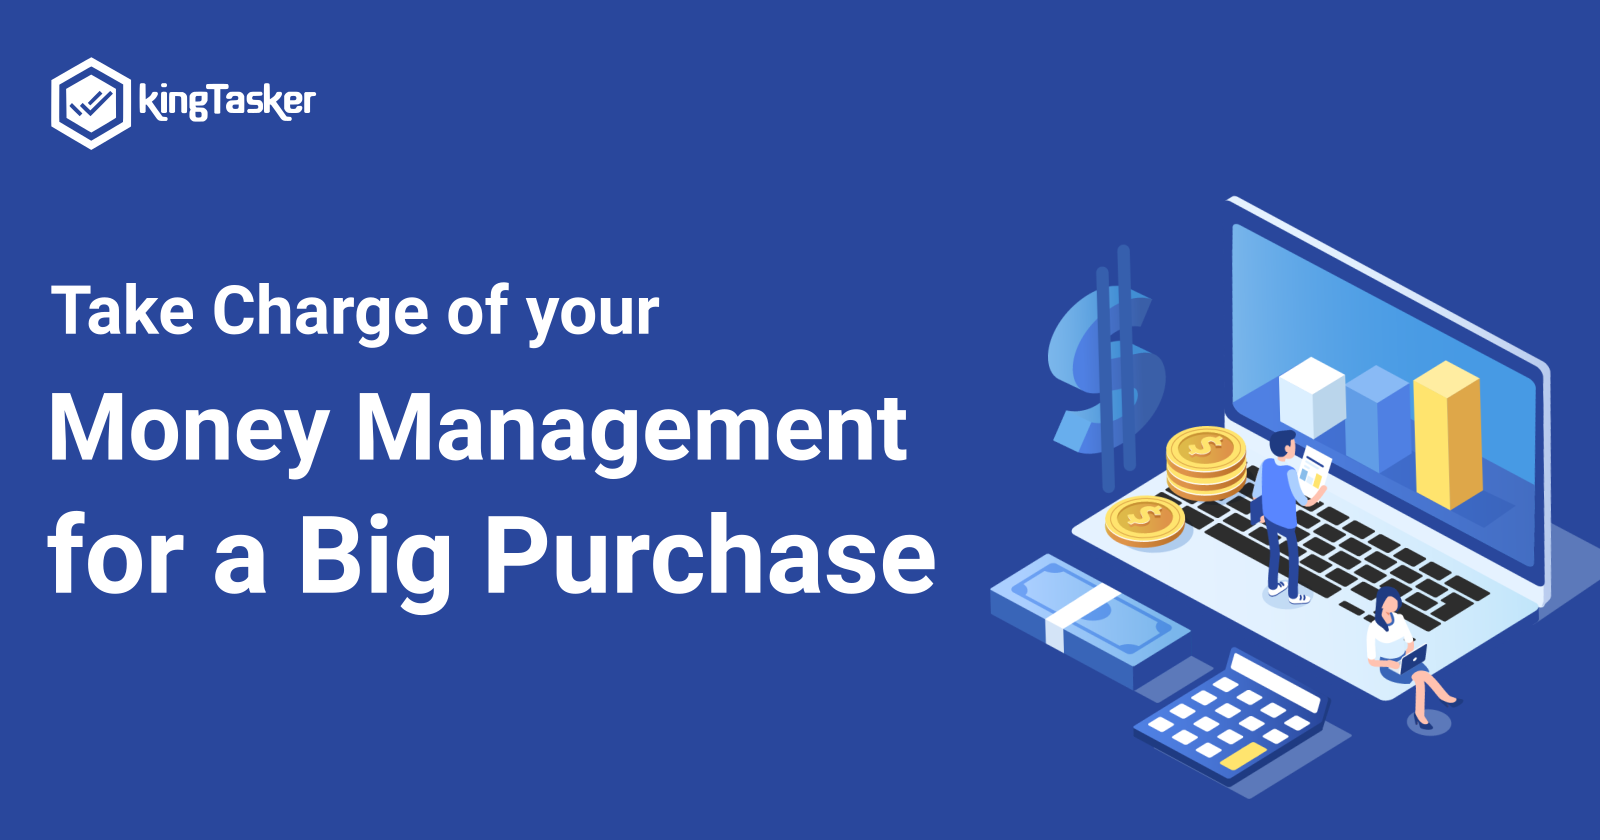 Take Charge of your Money Management for a Big Purchase